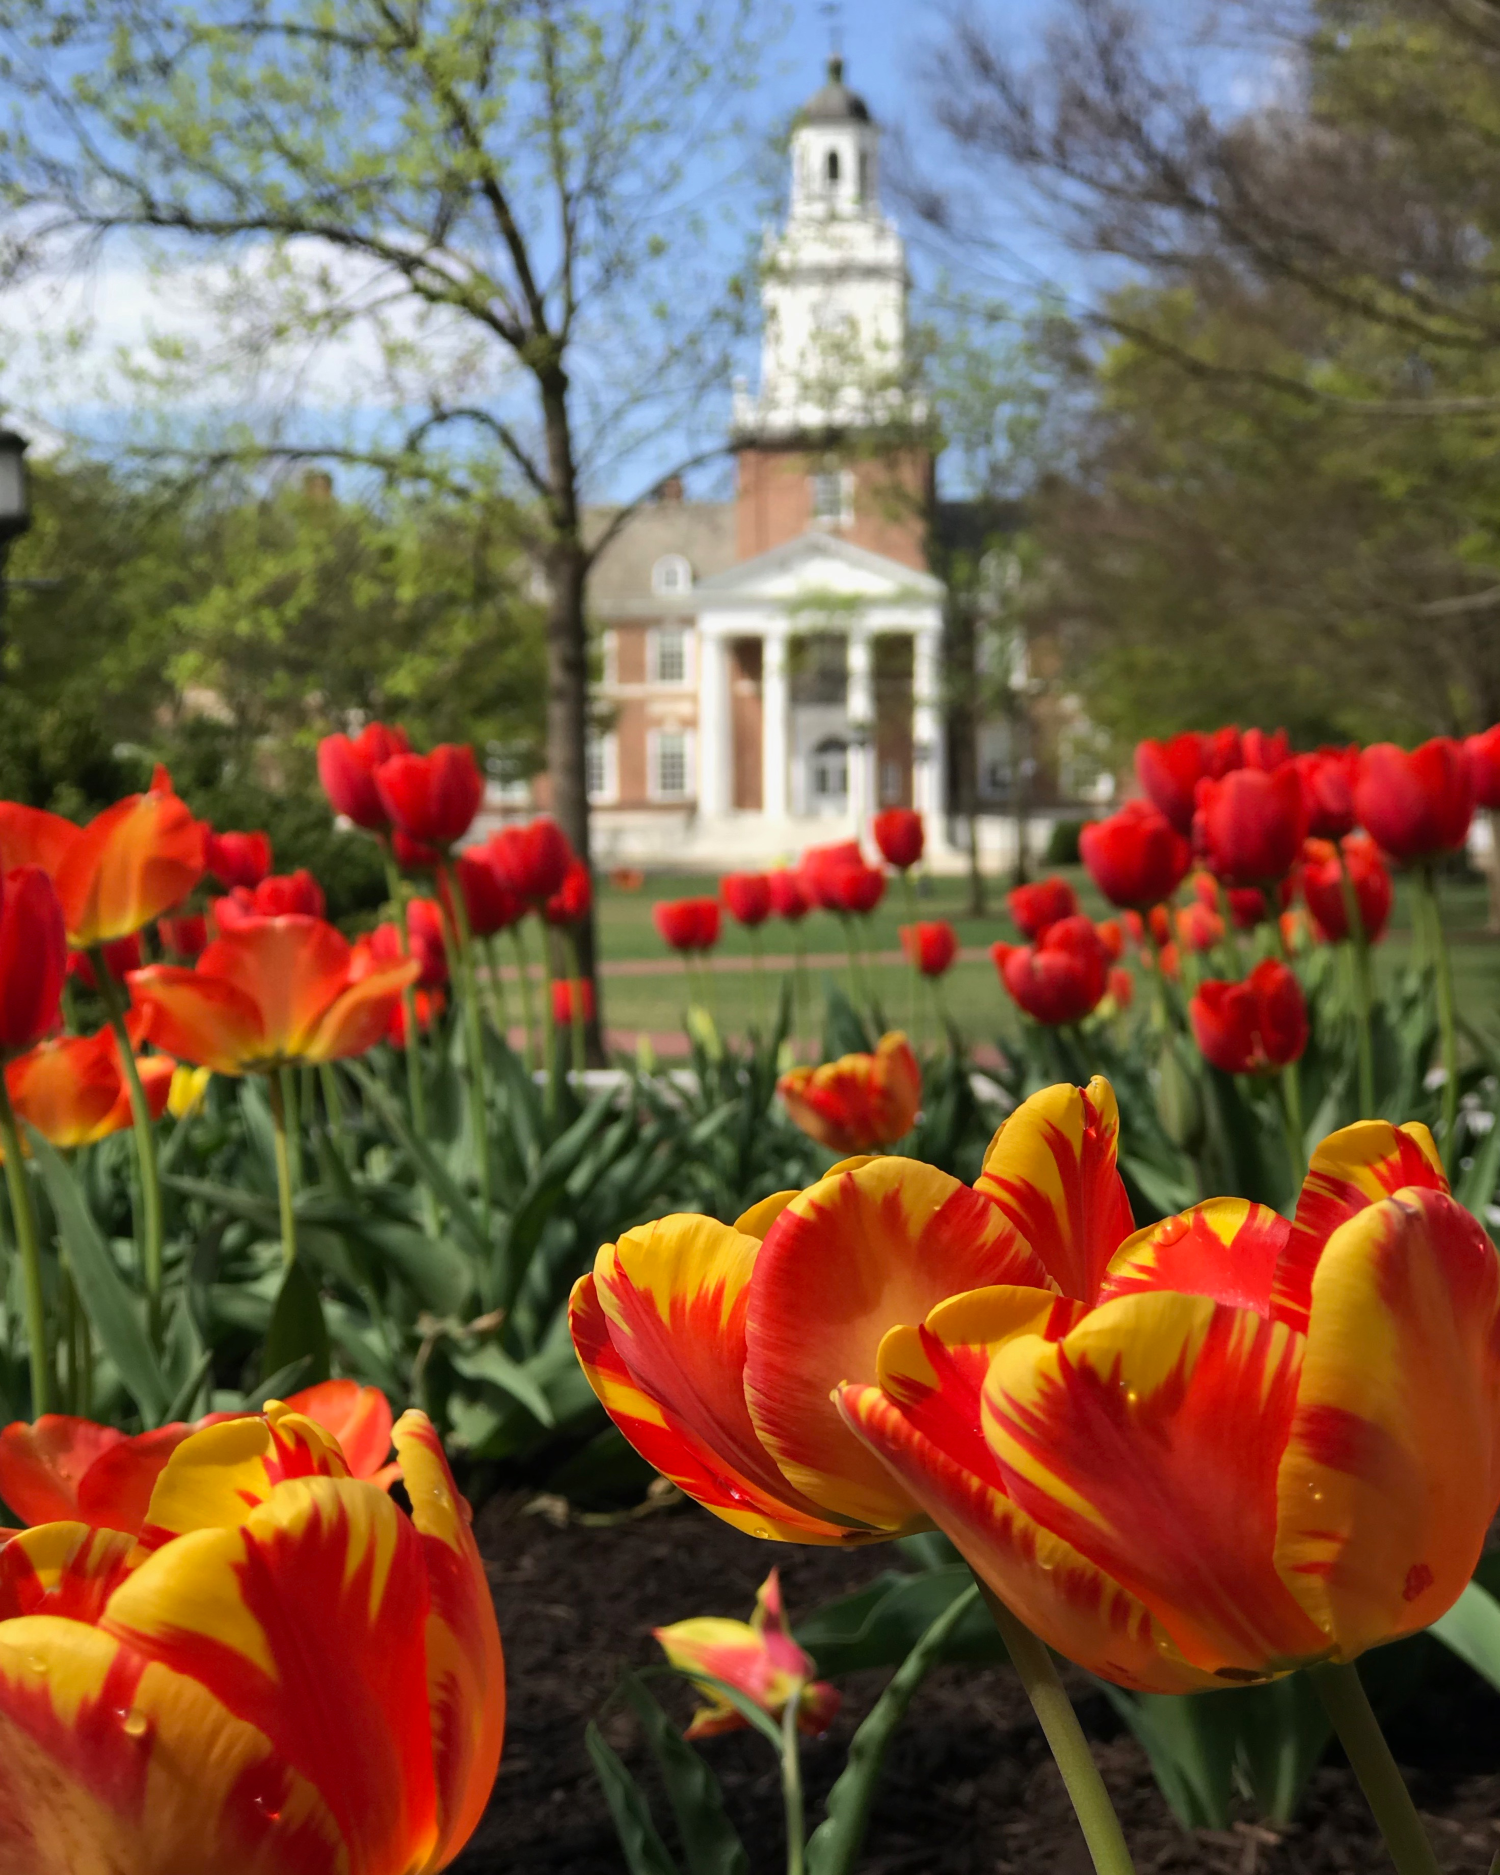 Tulips in front of Gilman Hall at Johns Hopkins University on a sunny day